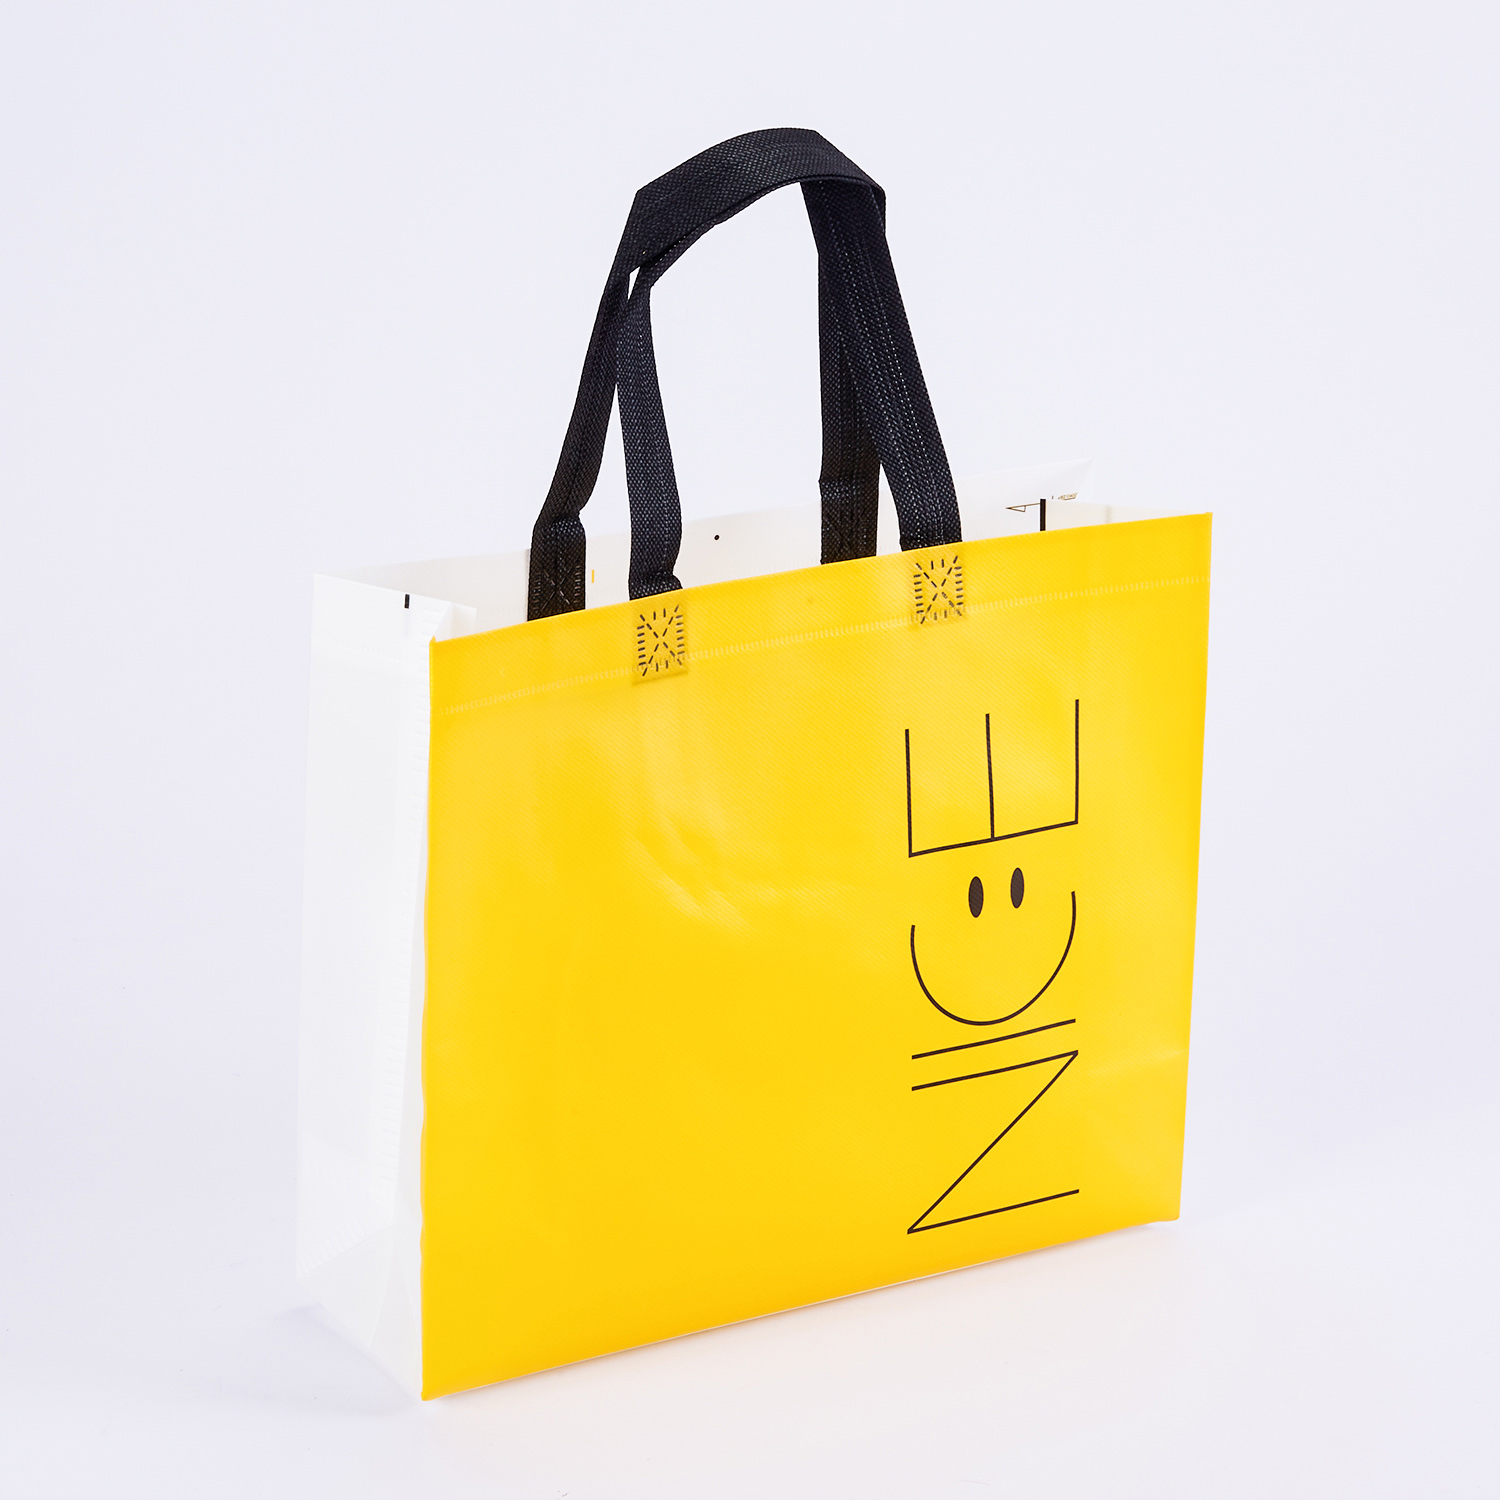  Setting New Standards for Non-Woven Tote Bags